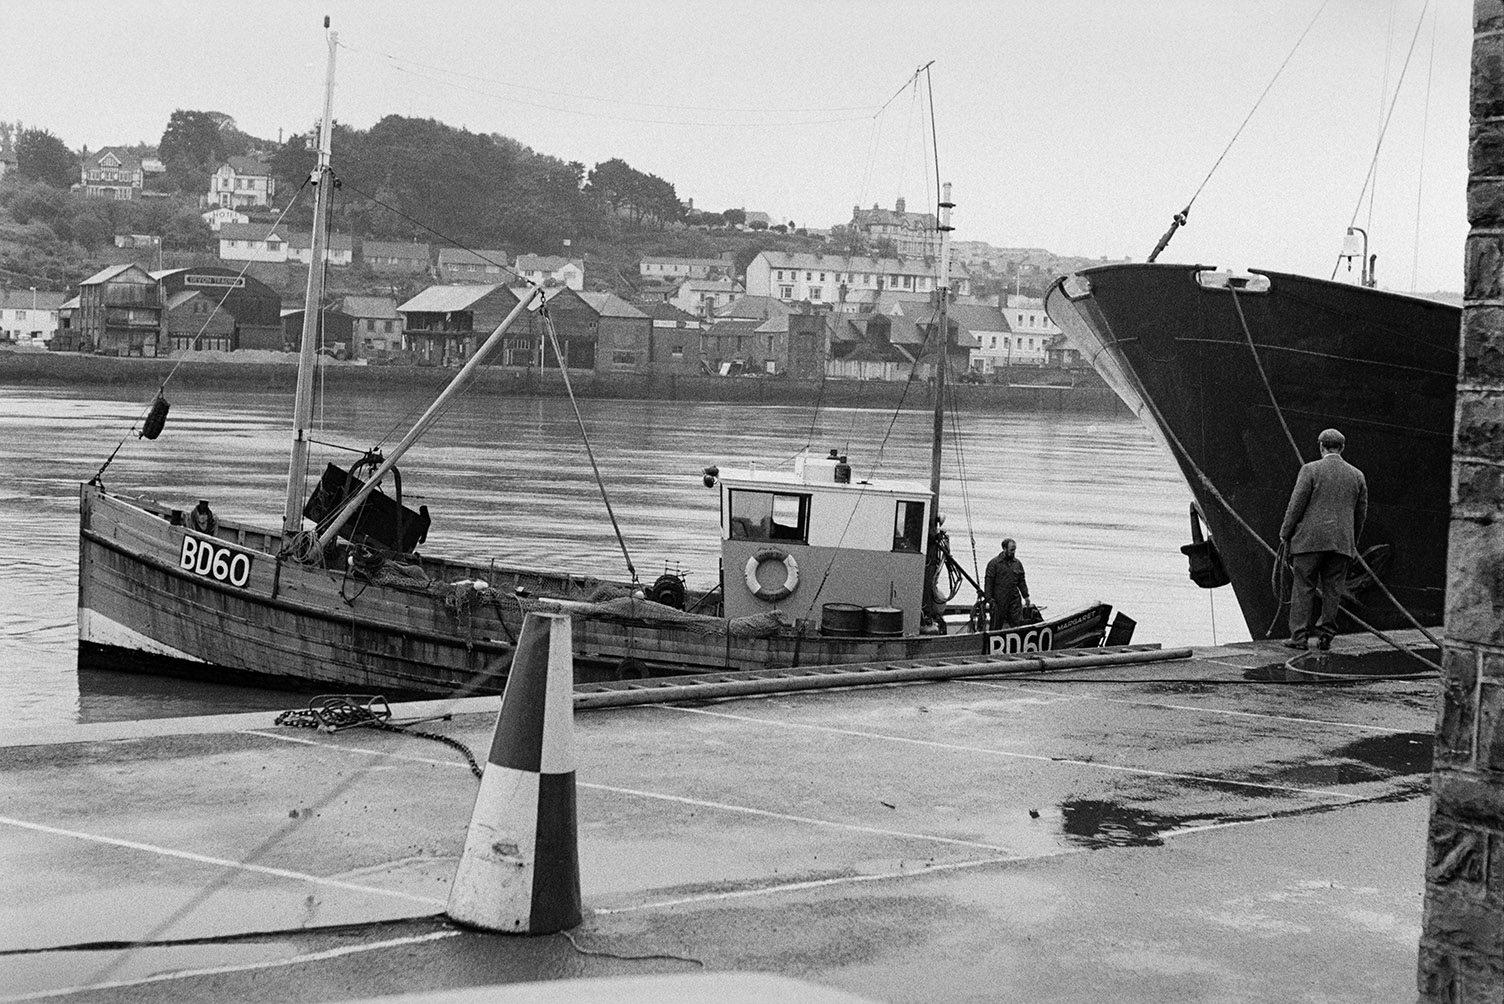 A fishing boat coming to moor up at the quayside at Bideford, next to the ship 'Lone Bres'. A man is waiting on the quayside with ropes to tie the boat up. Various building can be seen on the opposite side of the River Torridge.